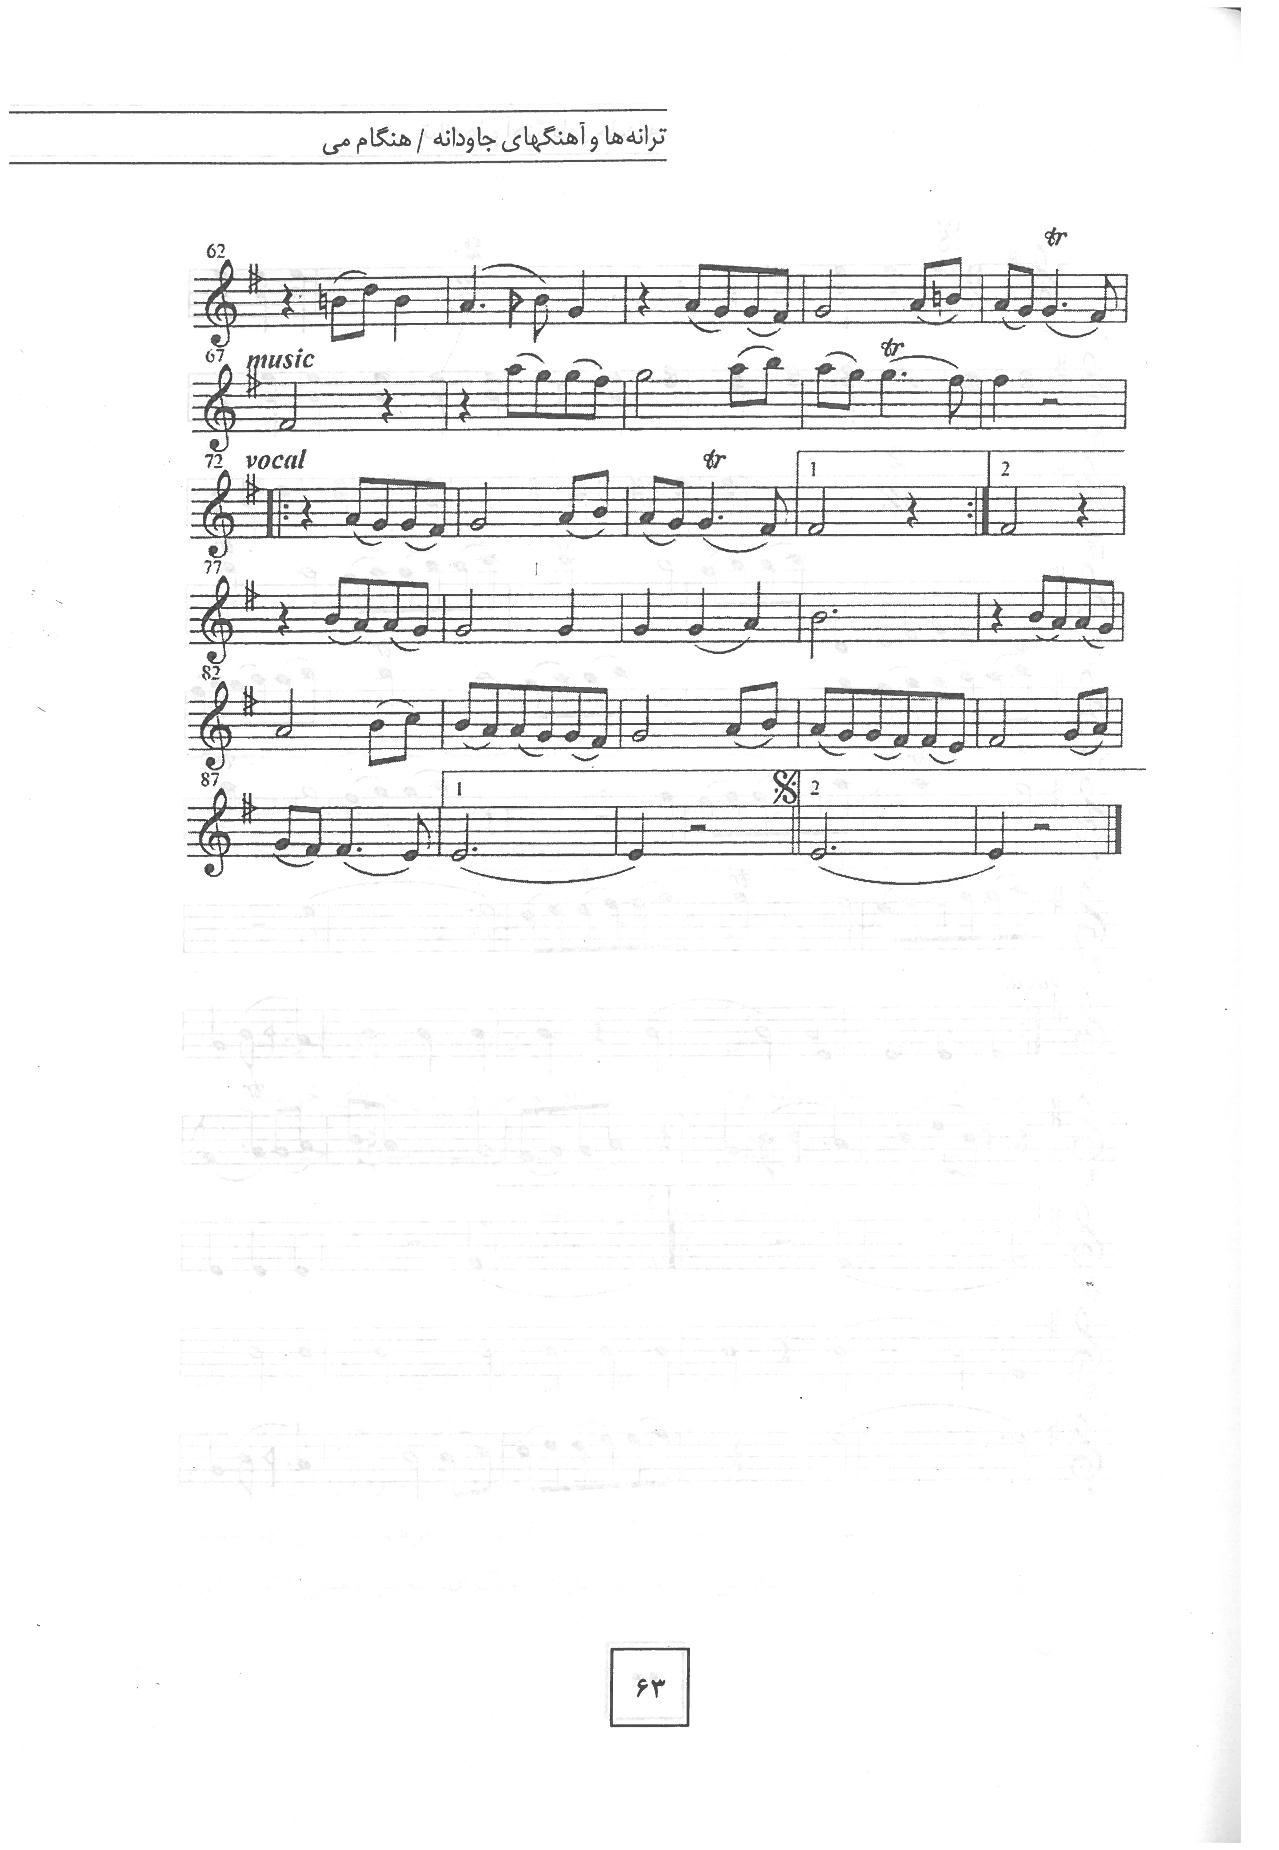 A sheet music page with several lines of musical notes.